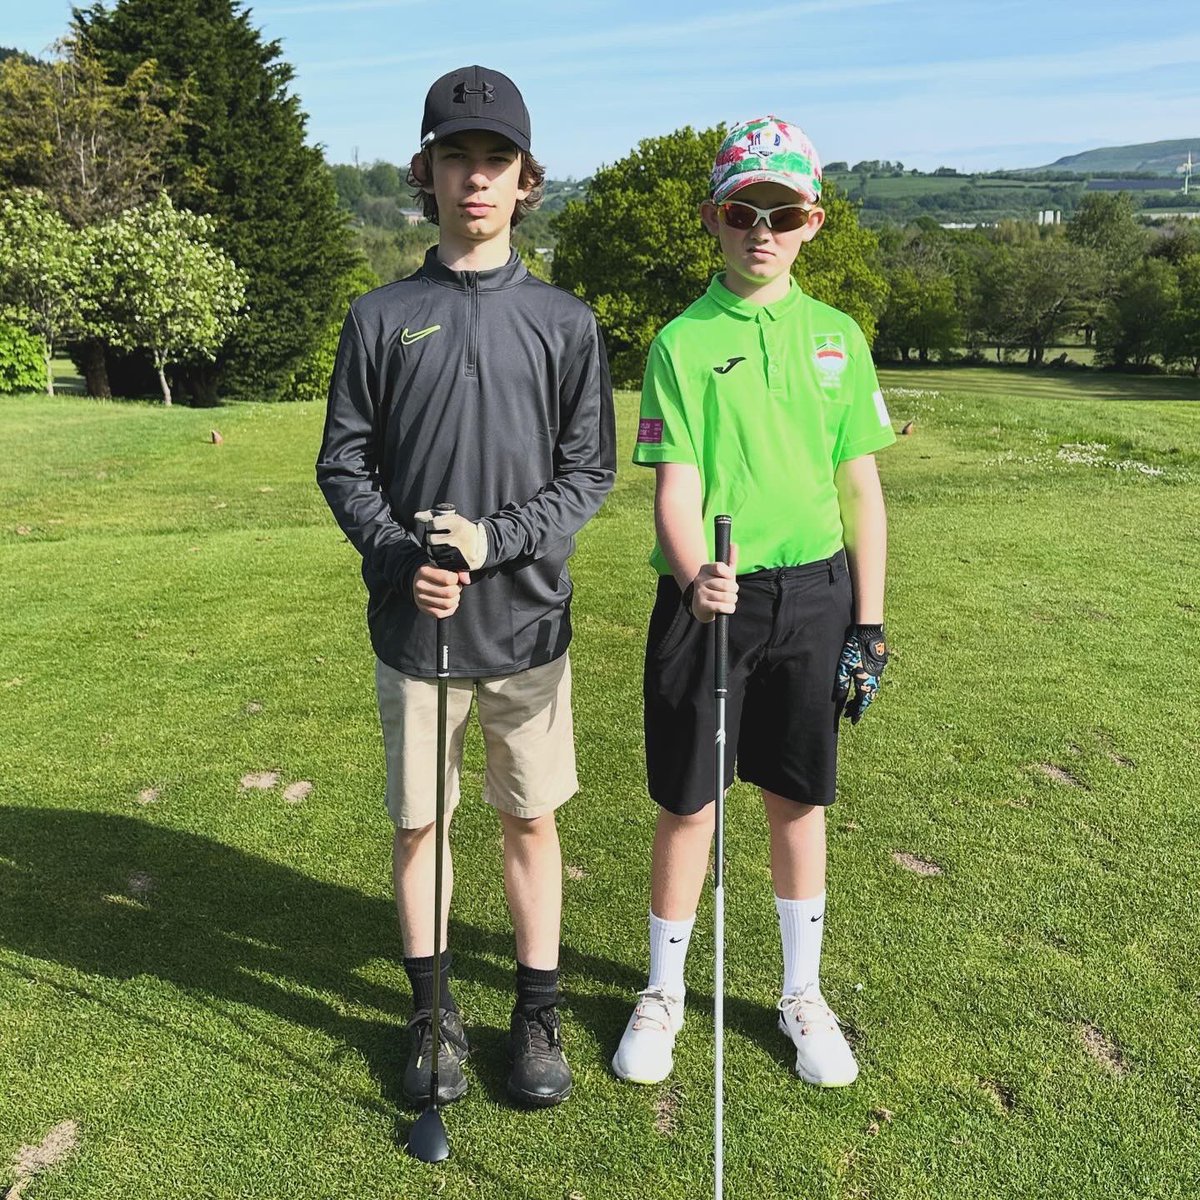 The sun was shining today for our Juniors!!
We played our second major of the year - The Spring Cup🏆

Some great scoring and lots of smiles😀… and suntan lotion!!

Well done to Rhys H who won Division 1 with 38 pts and to Cameron who won Division 2 with 35 pts👏🏻👏🏻

#juniorgolf